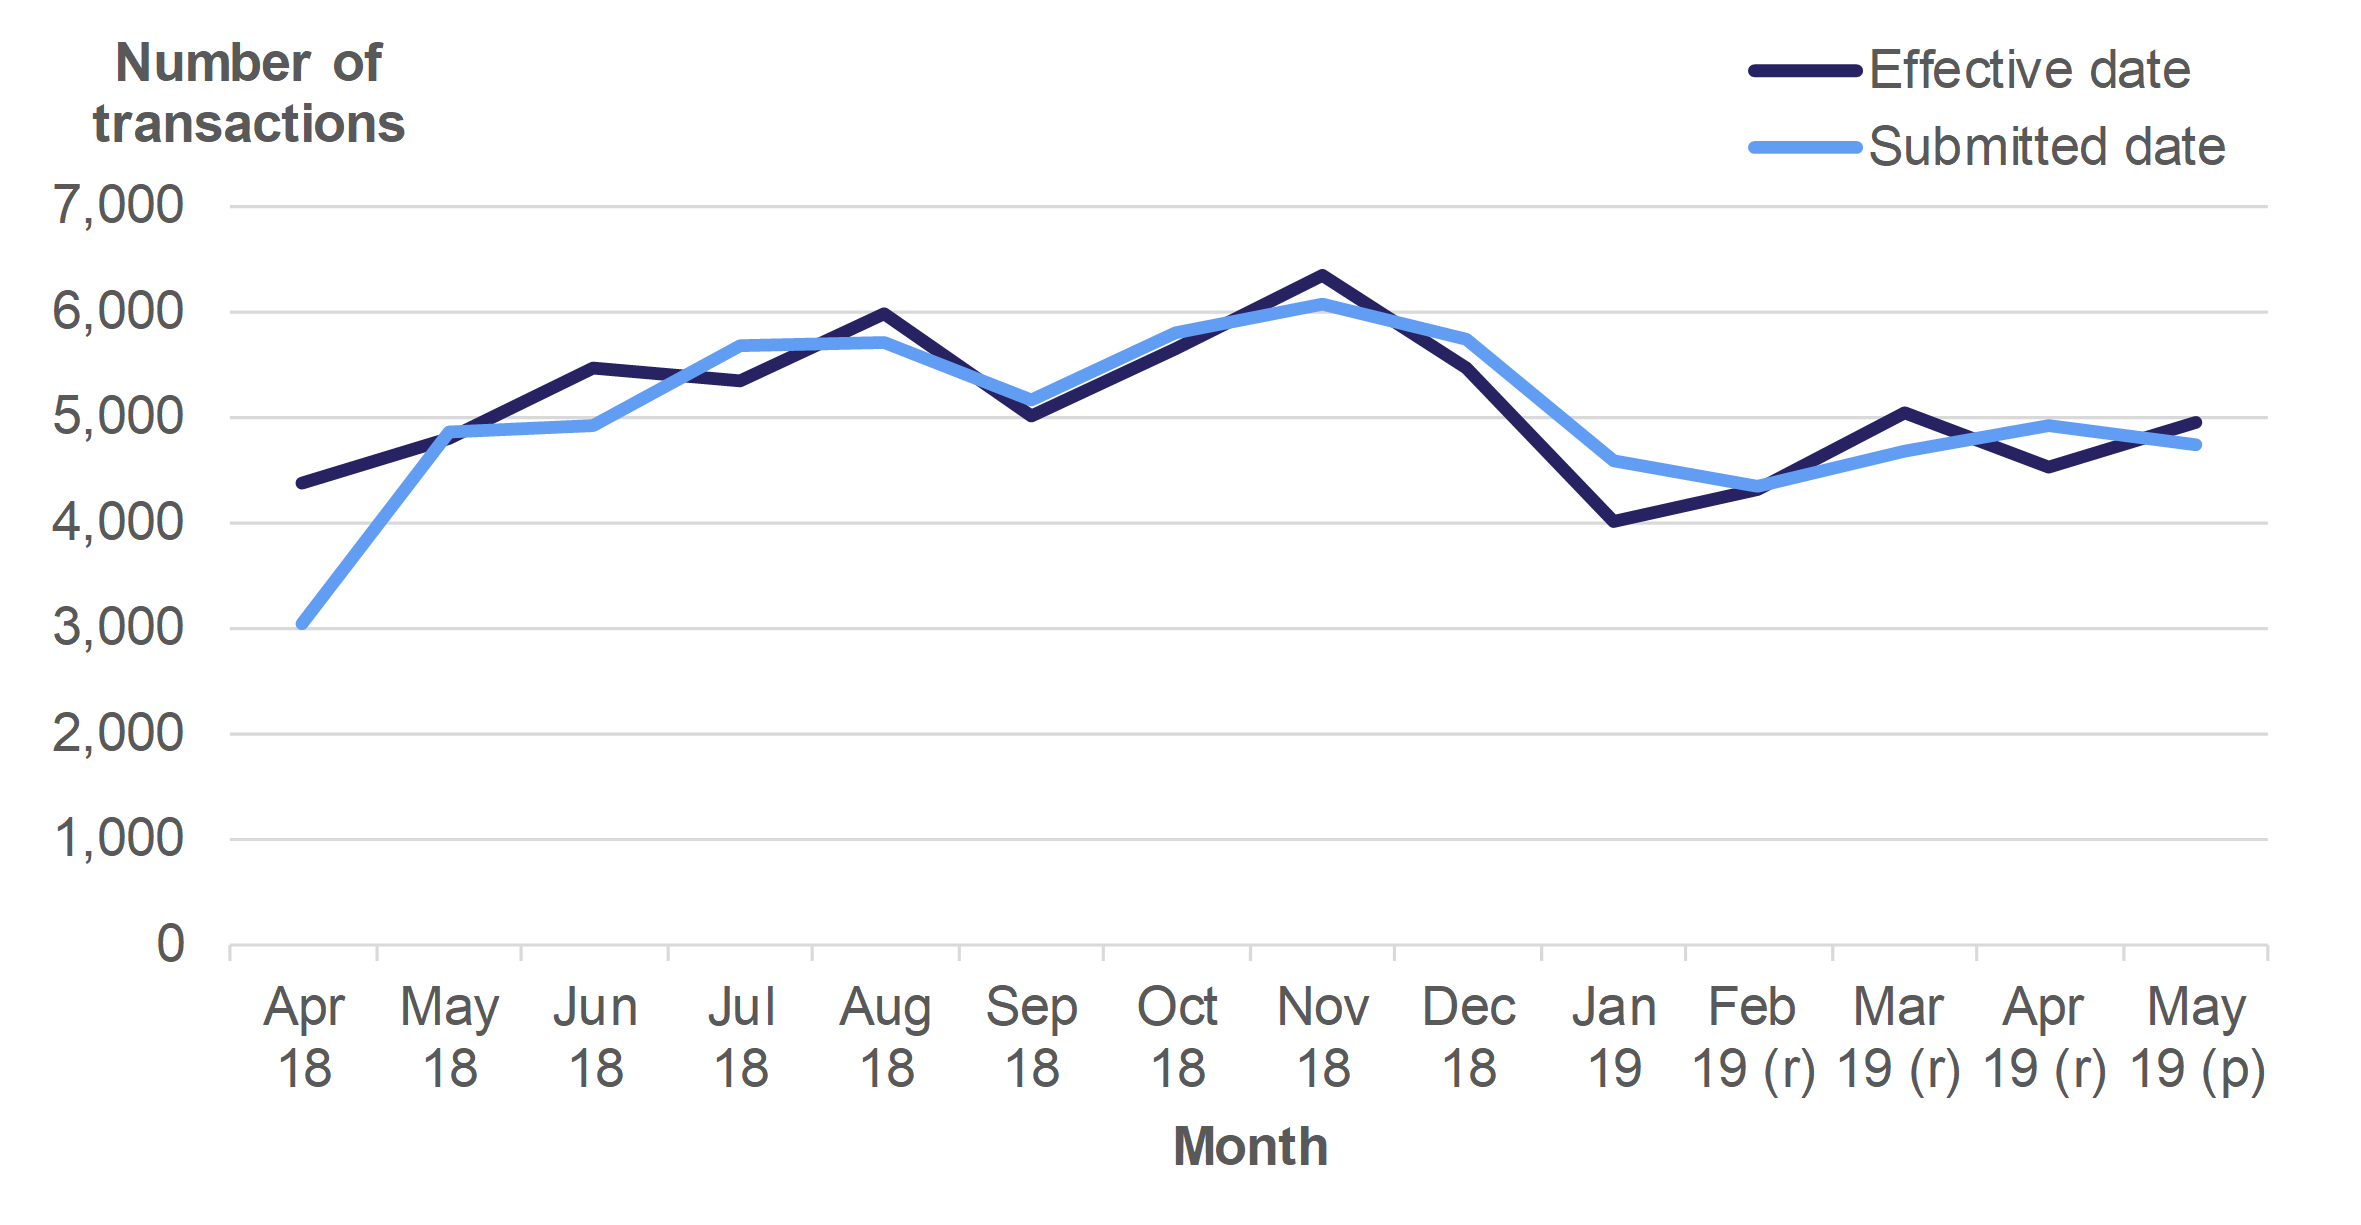 Figure 10.7 shows the monthly numbers of transactions which became effective and which were submitted, from April 2018 to May 2019.